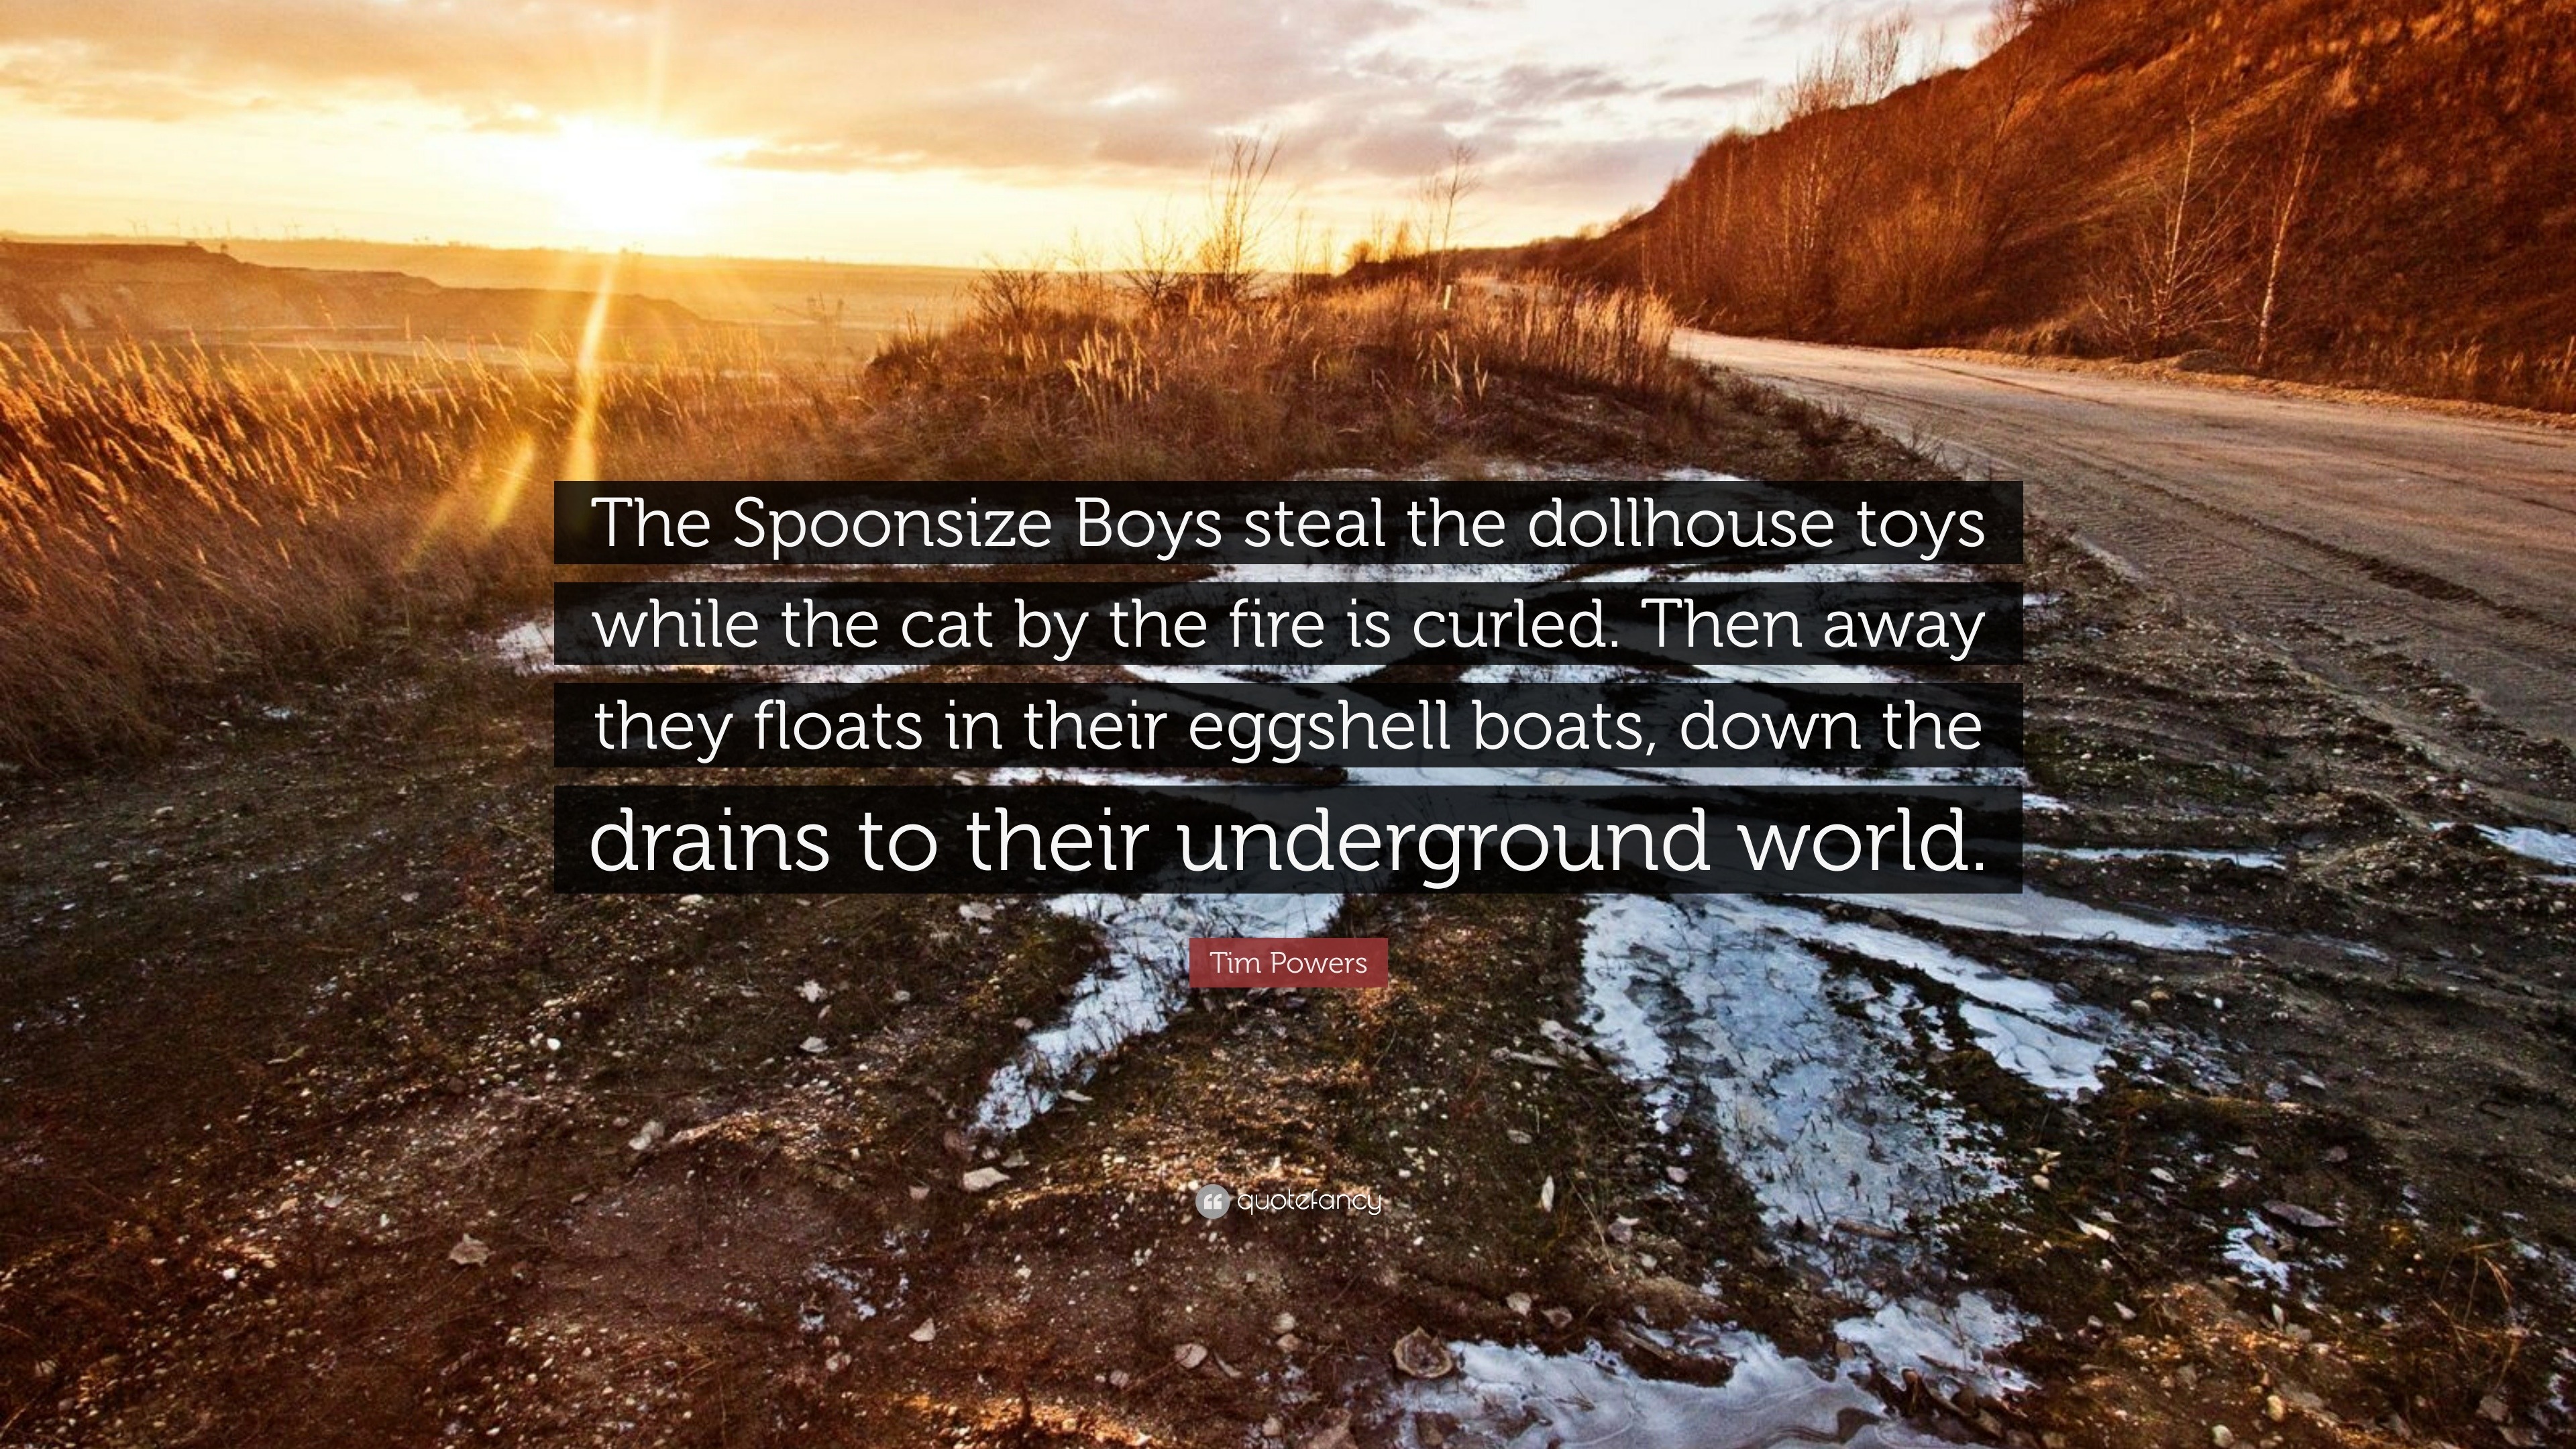 Tim Powers Quote The Spoonsize Boys Steal The Dollhouse Toys Images, Photos, Reviews